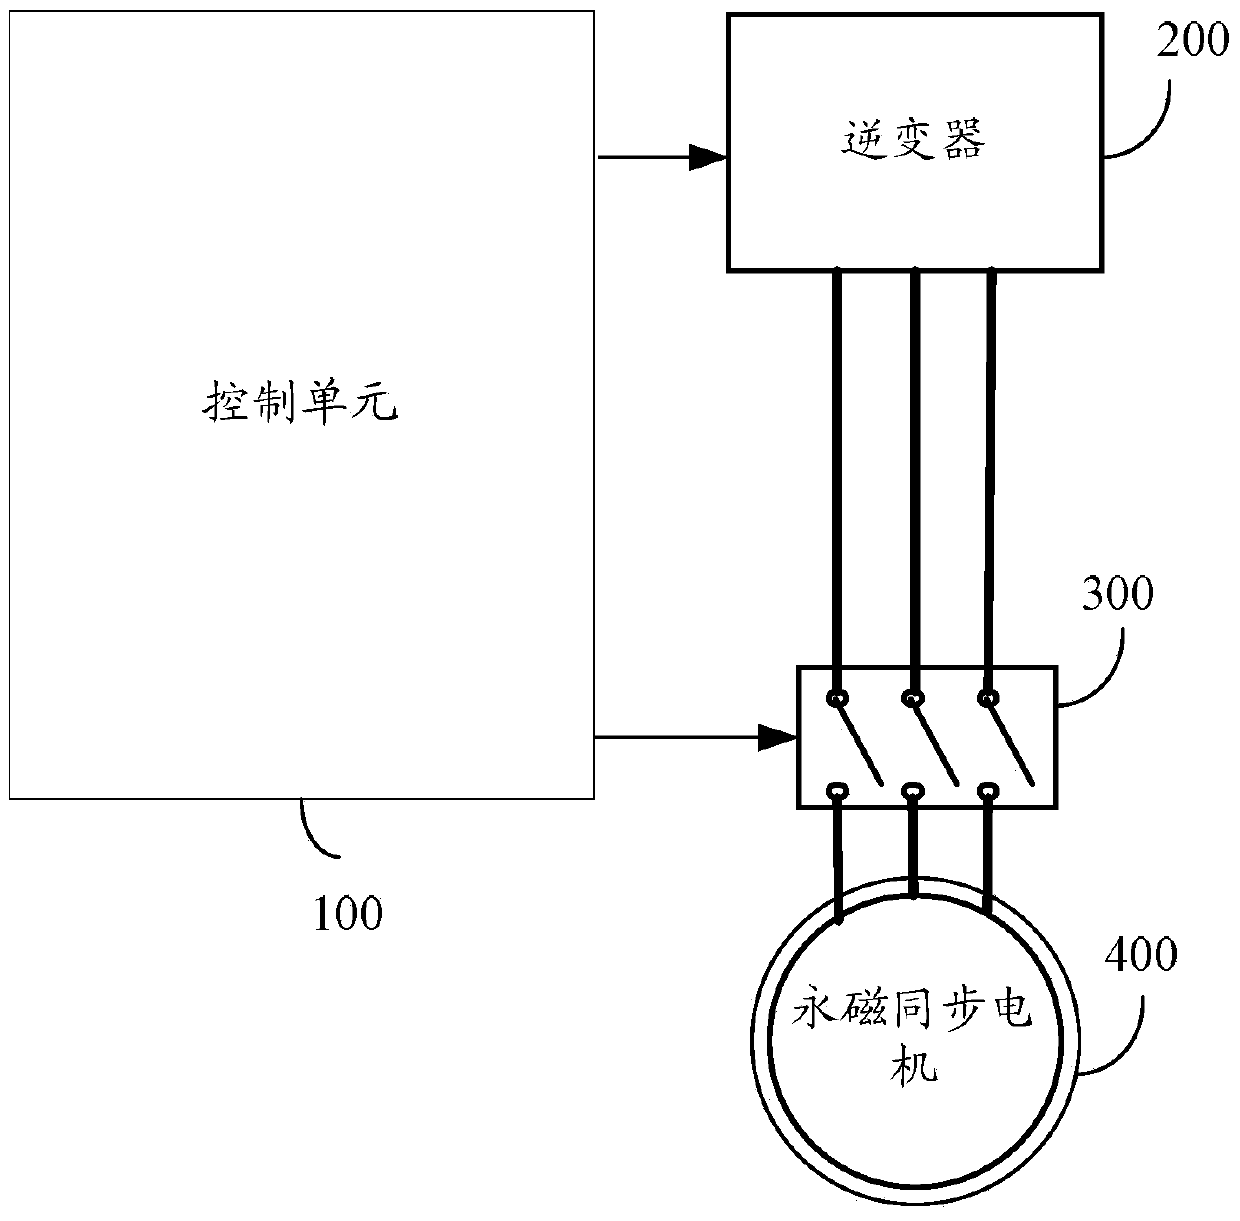 Method, device and system for controlling PMSM (Permanent Magnet Synchronous Motor) to put into operation again at belt speed